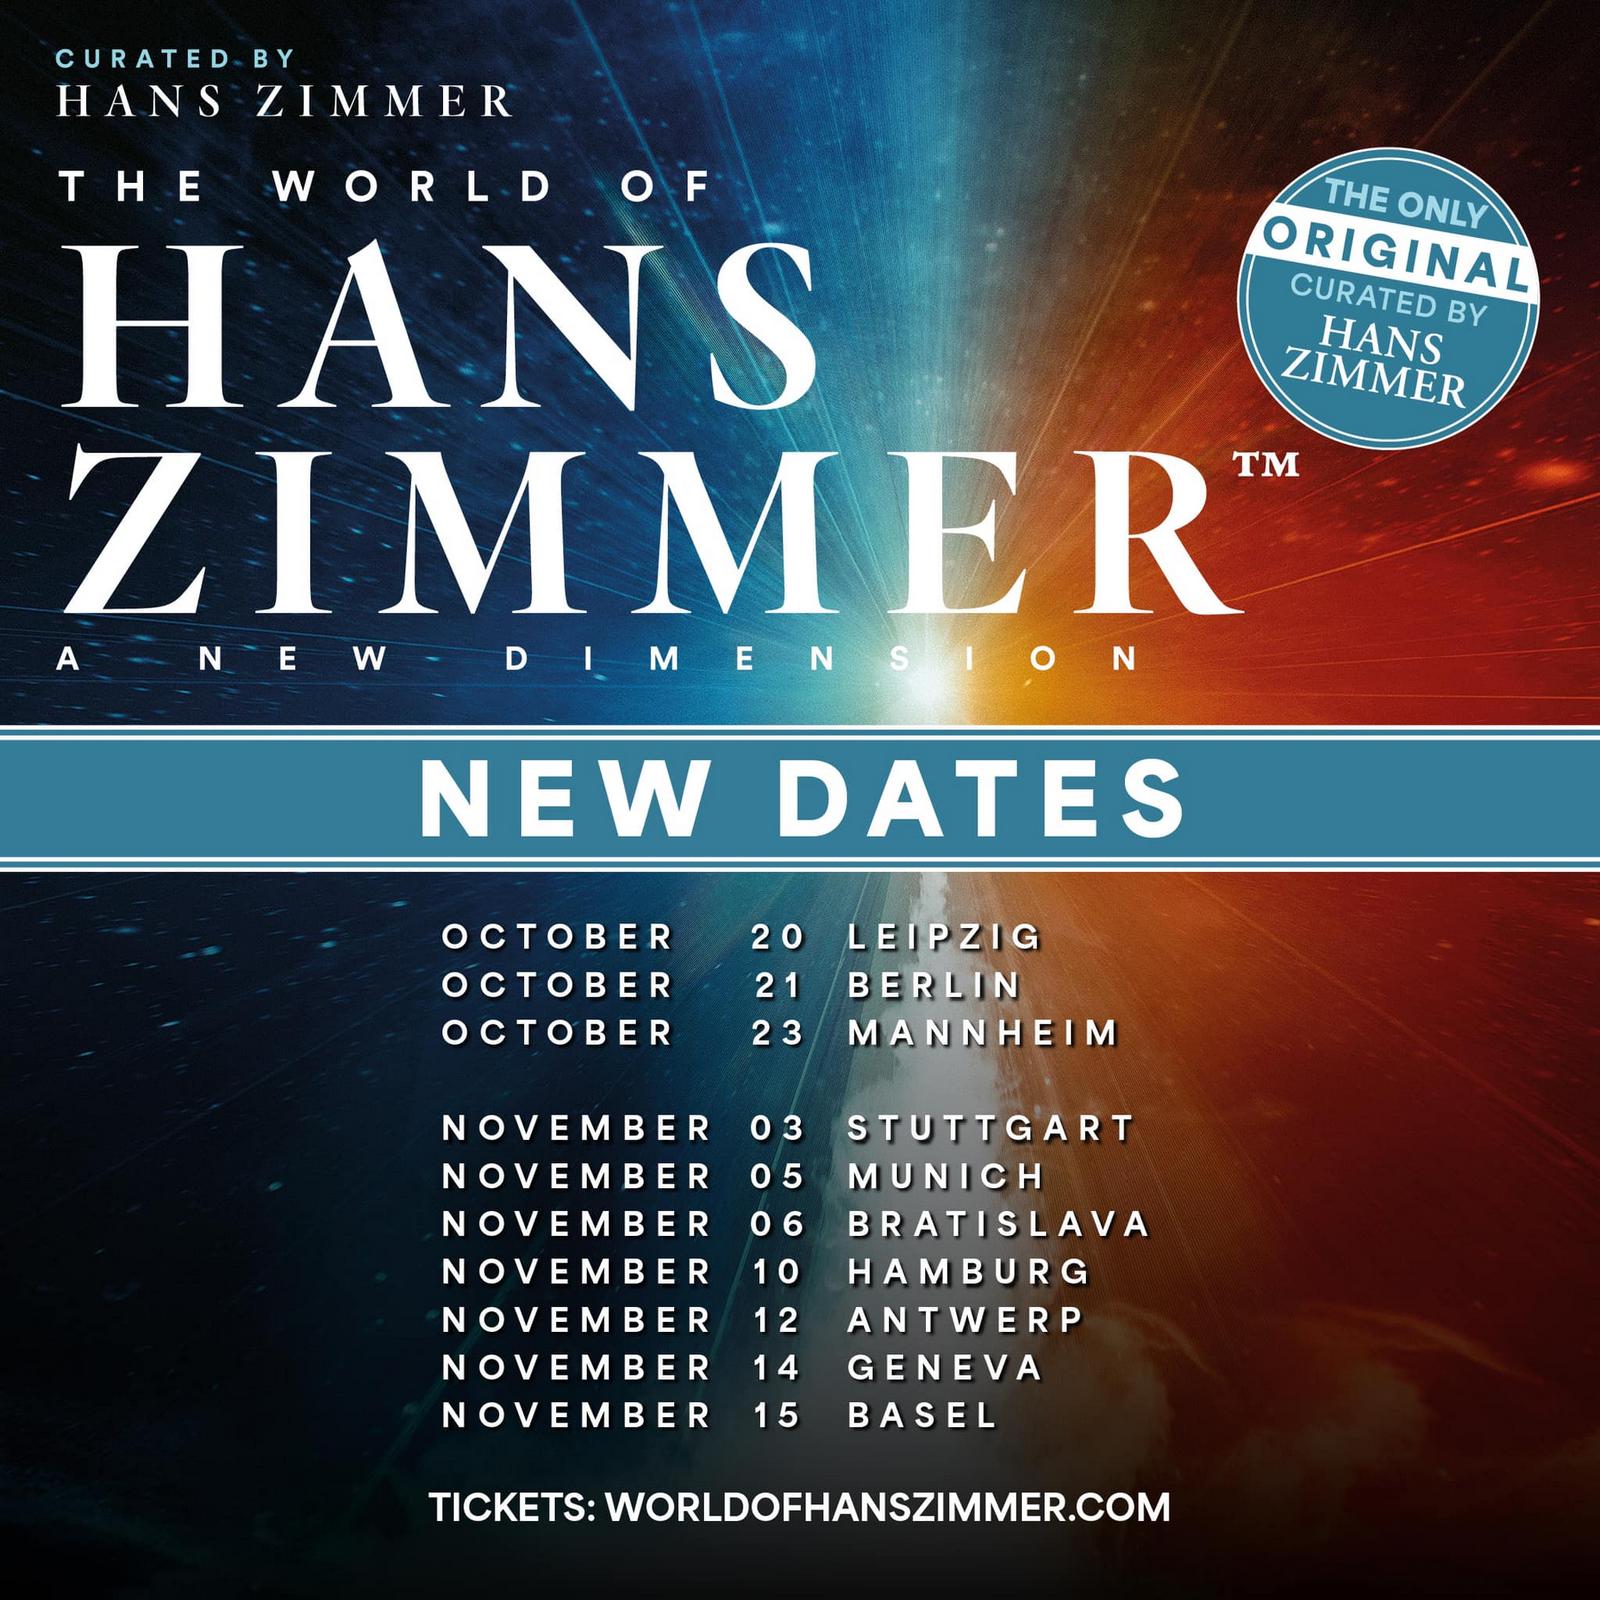 Hans Zimmer - Albums, Songs, and News